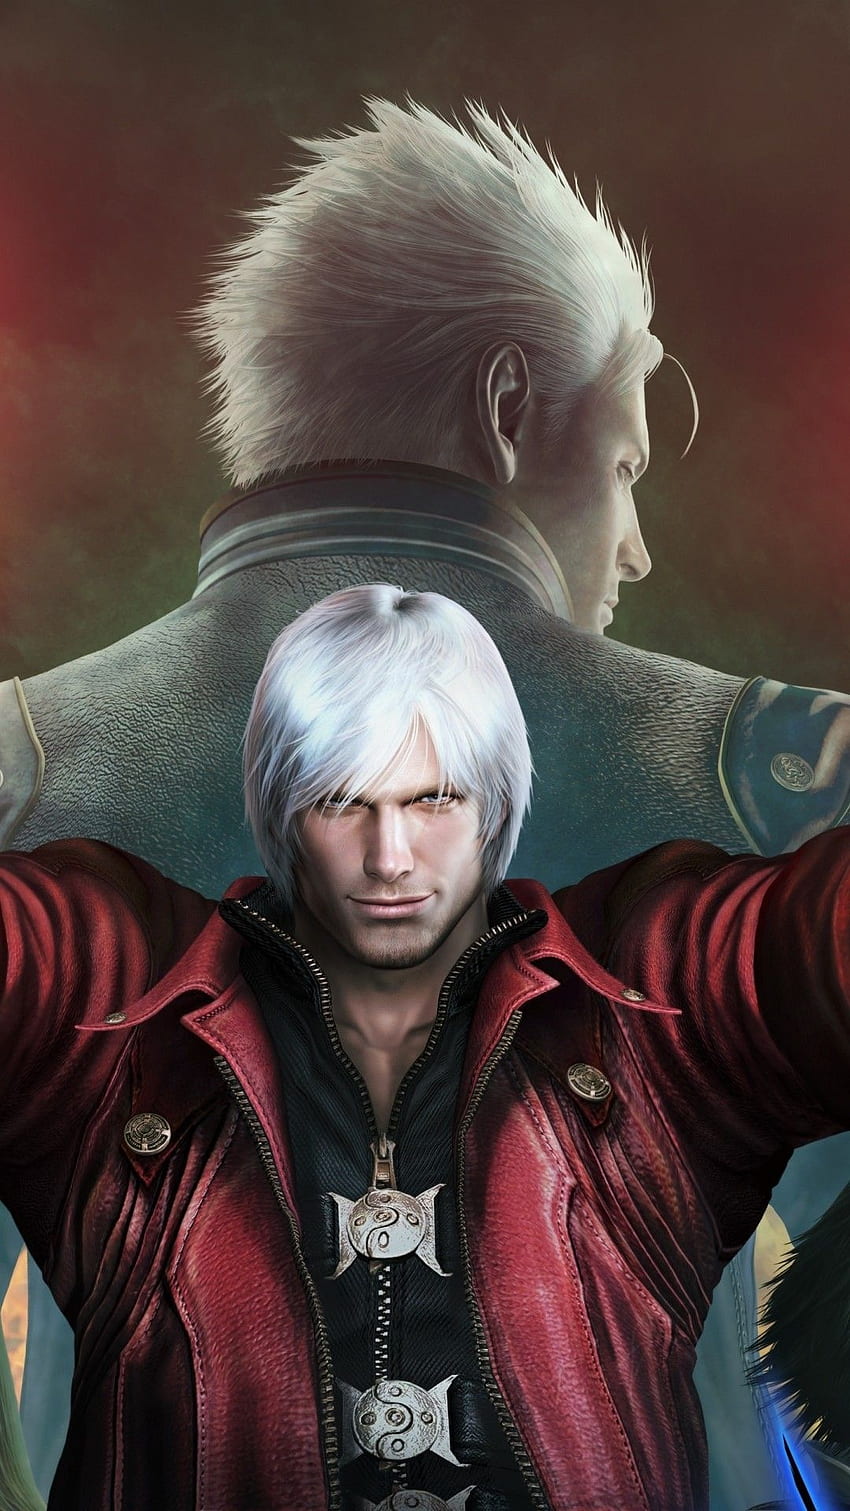 Devil May Cry, Dante, Vergil, Trish for iPhone 8, iPhone 7 Plus, iPhone 6+, Sony Xperia Z, HTC One HD phone wallpaper